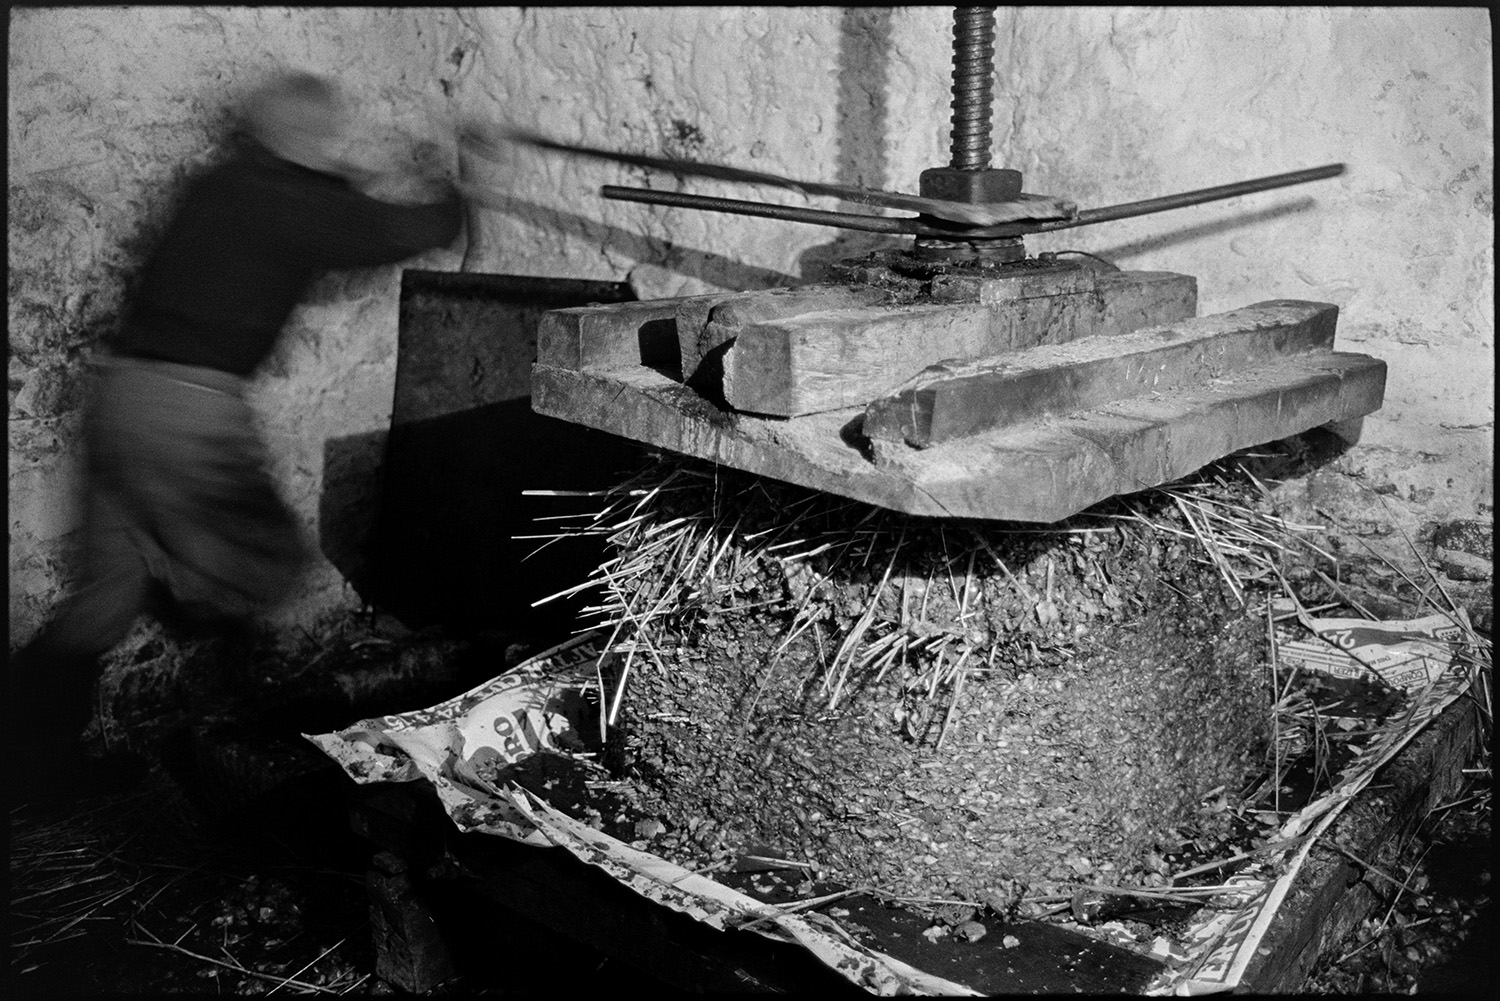 Cider making, man operating cider press. 
[Bill Hammond operating a cider press in a barn at Rashleigh Mill, Bridge Reeve. He is compressing the cheese, which is layers of apple pulp and straw.]